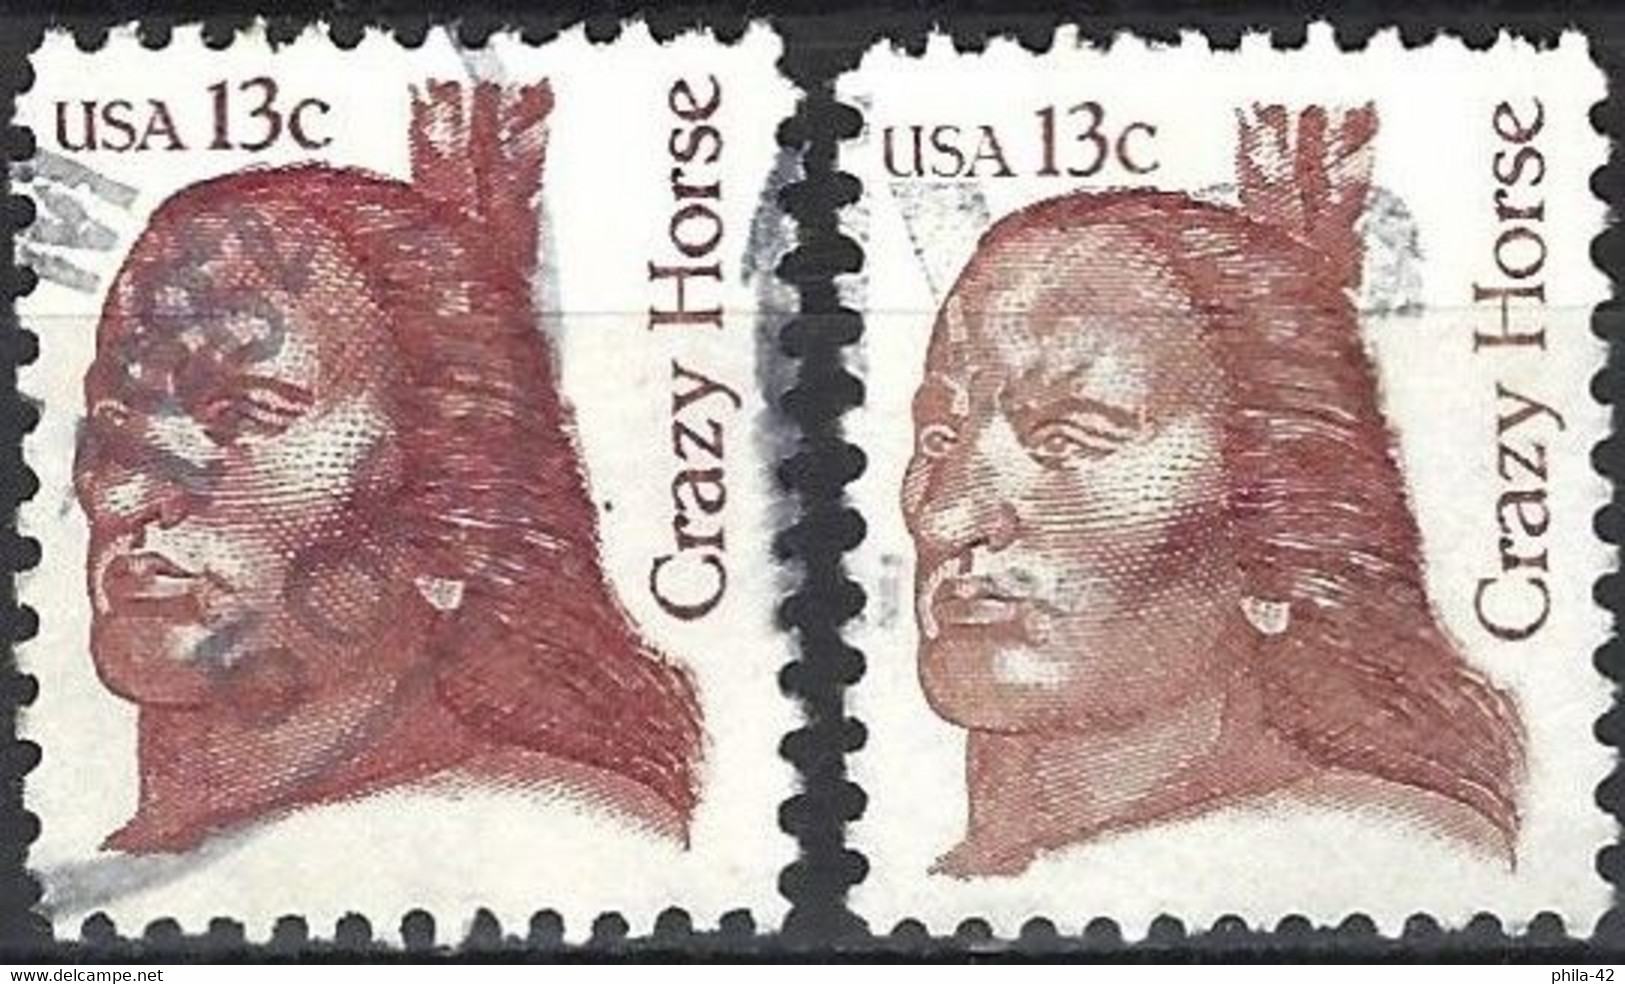 United States 1982 - Mi 1525 - YT 1374 ( Crazy Horse, Indian Chief ) Two Shades Of Color - Brown & Red Bown - Errors, Freaks & Oddities (EFOs)